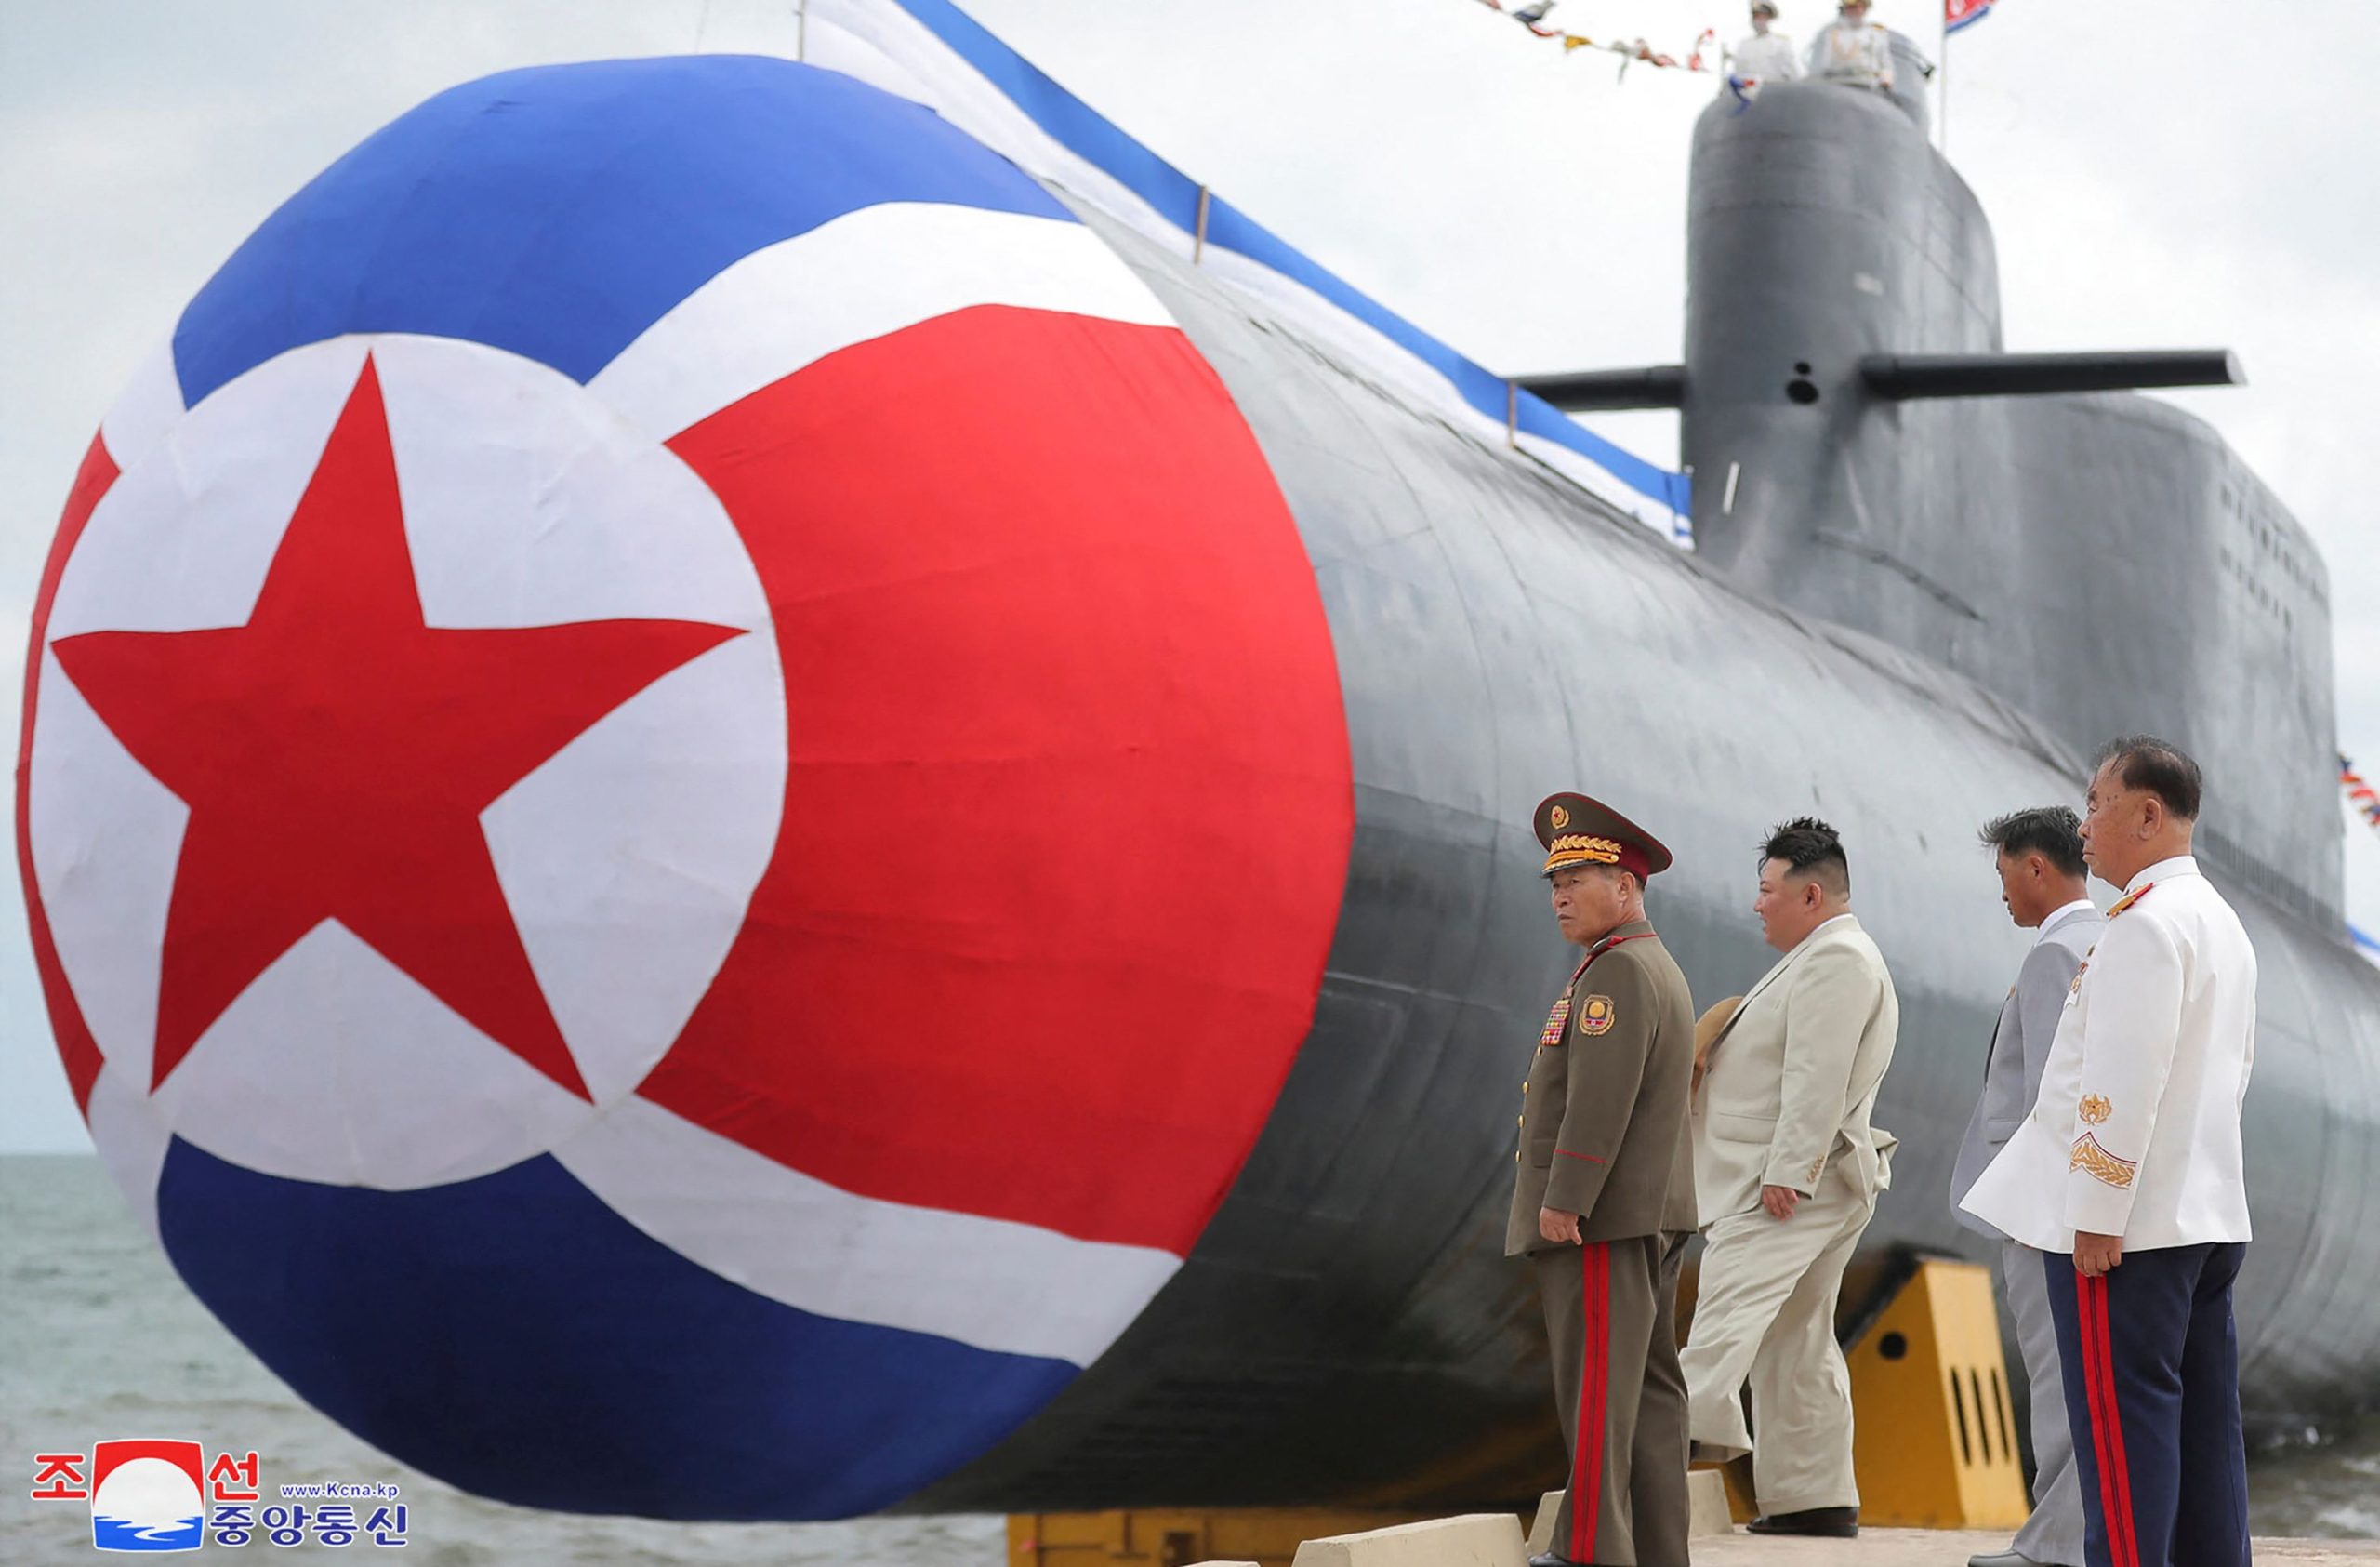 Kim Jong-un inspects a new North Korean submarine in images released by state media last September